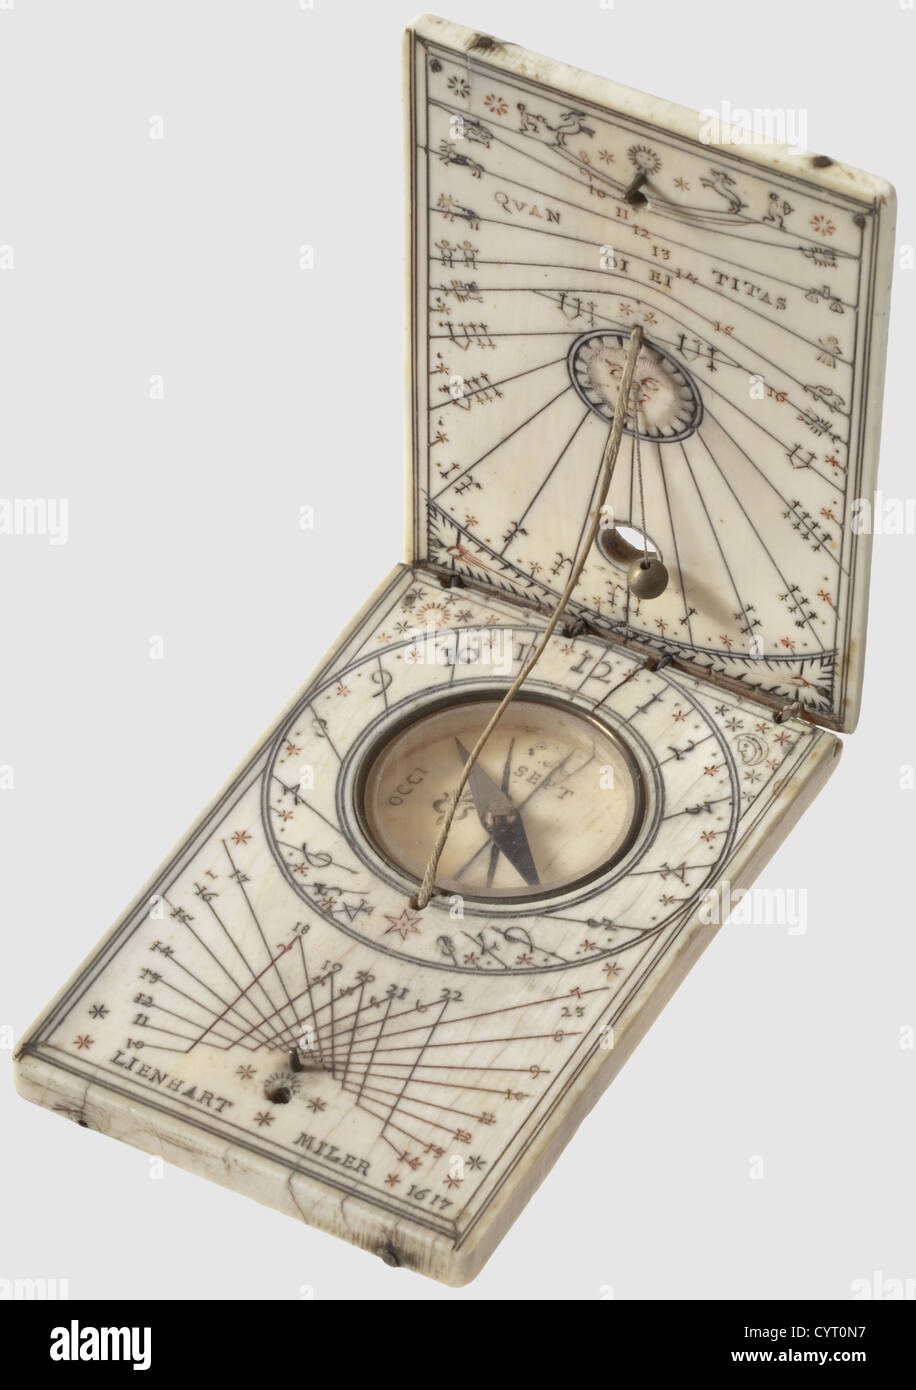 A German ivory folding sundial,Nuremberg,Leonhard Miller,1617 Of rectangular form with finely engraved and chased decoration.Folding lid with wire hinges and attached plumb bob.Compass with intact glass cover,the lower edge signed 'Lienhard Miler 1617'.The left edge with a small open compartment,the cover missing.Size 9.1 x 5.2 cm.Rare,superbly crafted folding sundial with beautiful decoration from late renaissance.Leonhard Müller,sundial maker,is known to have worked in Nuremberg between 1594 and 1653.Some of his extremely elaborate ivory sundia,Additional-Rights-Clearences-Not Available Stock Photo